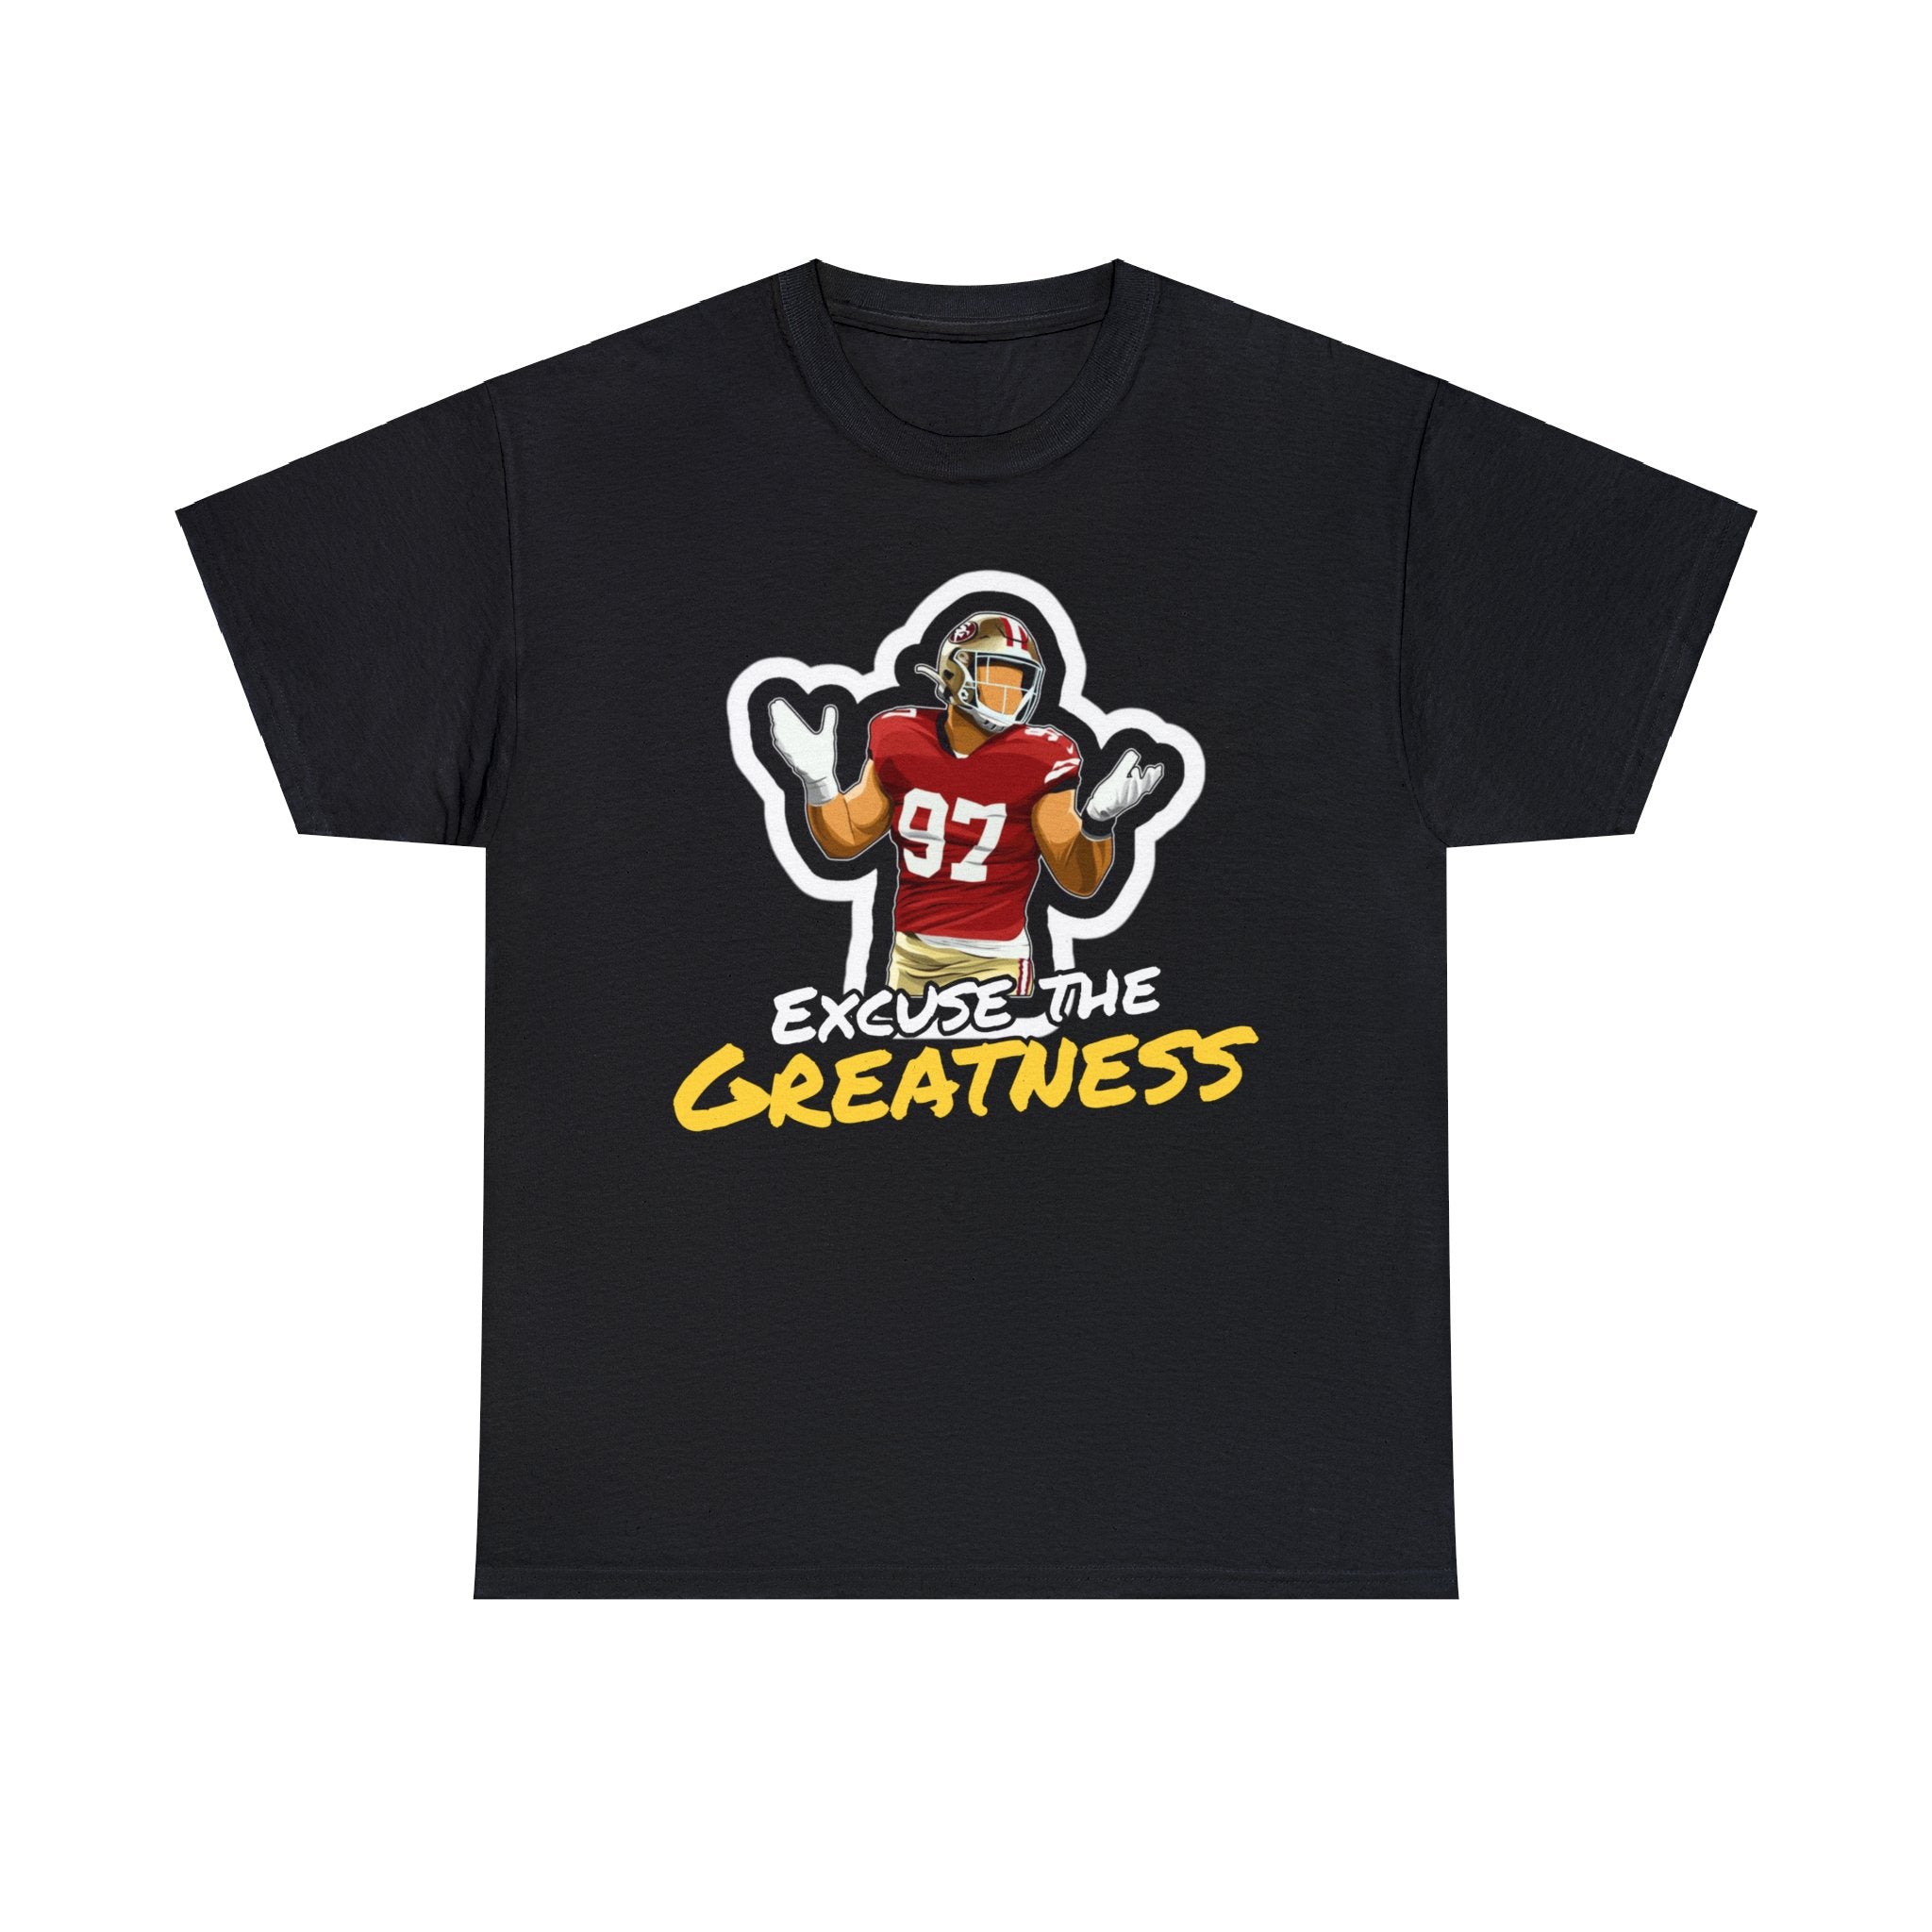 Jersey San Francisco ''The Greatness''